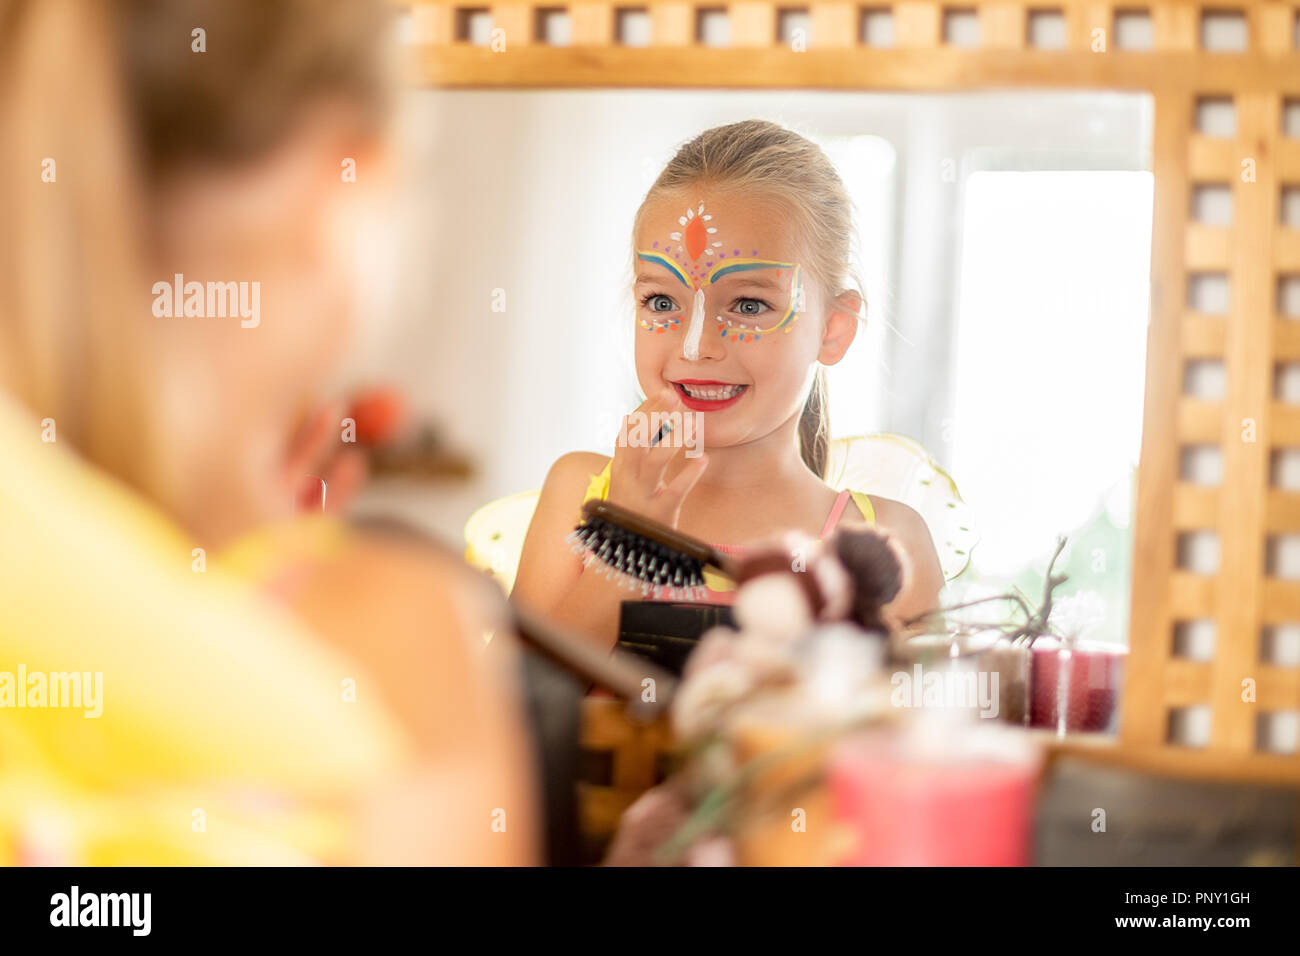 Happy child with face paint and wearing halloween costume looking in the mirror, smiling. Excited young girl looking at herself in the mirror. Stock Photo